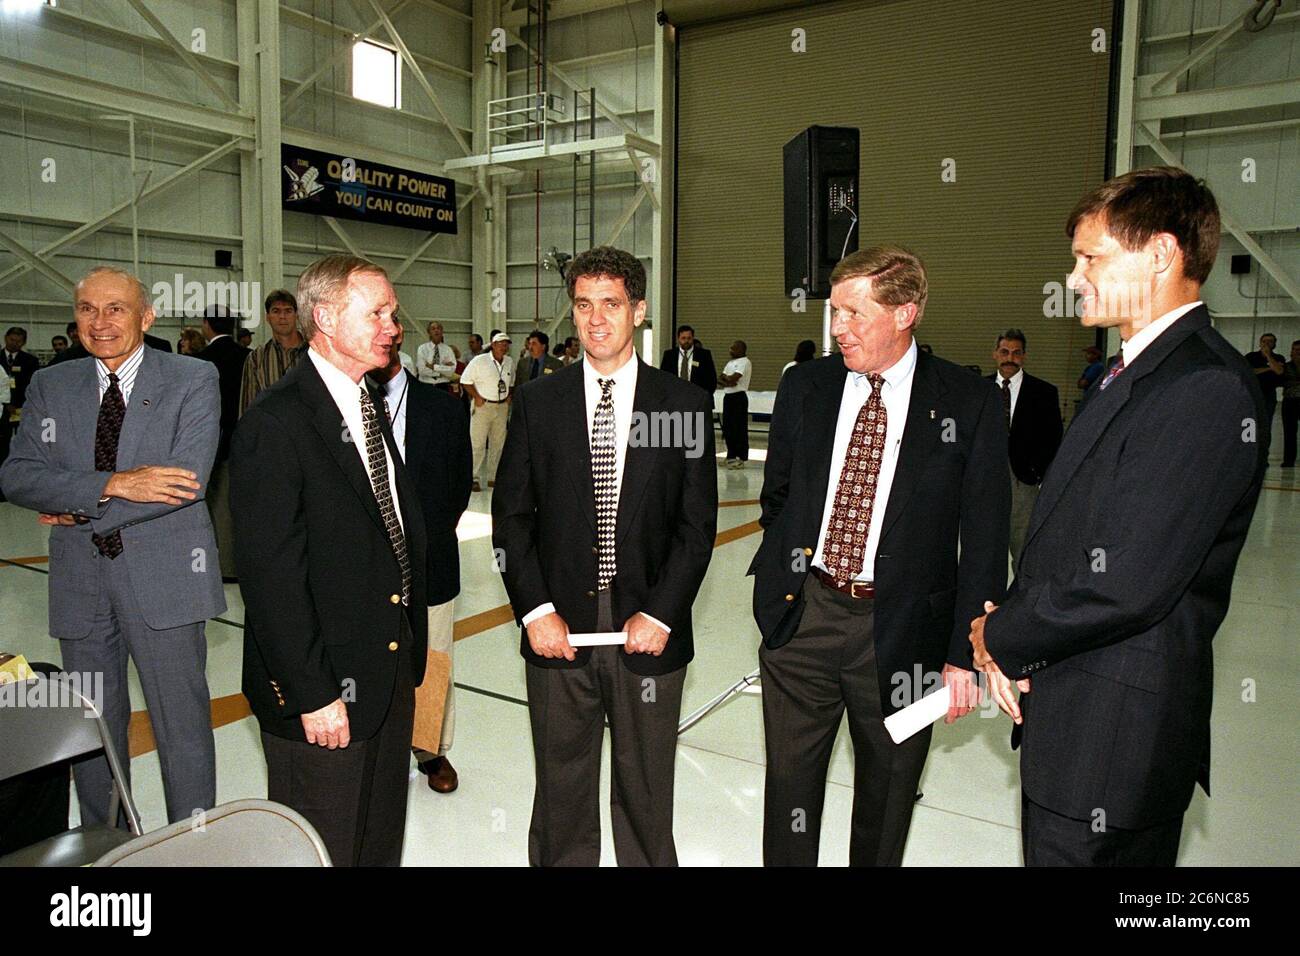 Participants in the ribbon cutting for KSC's new 34,600-square-foot Space Shuttle Main Engine Processing Facility (SSMEPF) gather to talk inside the facility following the ceremony. From left, they are Robert B. Sieck, director of Shuttle Processing; KSC Center Director Roy D. Bridges Jr.; U.S. Congressman Dave Weldon; John Plowden, vice president of Rocketdyne; and Donald R. McMonagle, manager of Launch Integration. Stock Photo